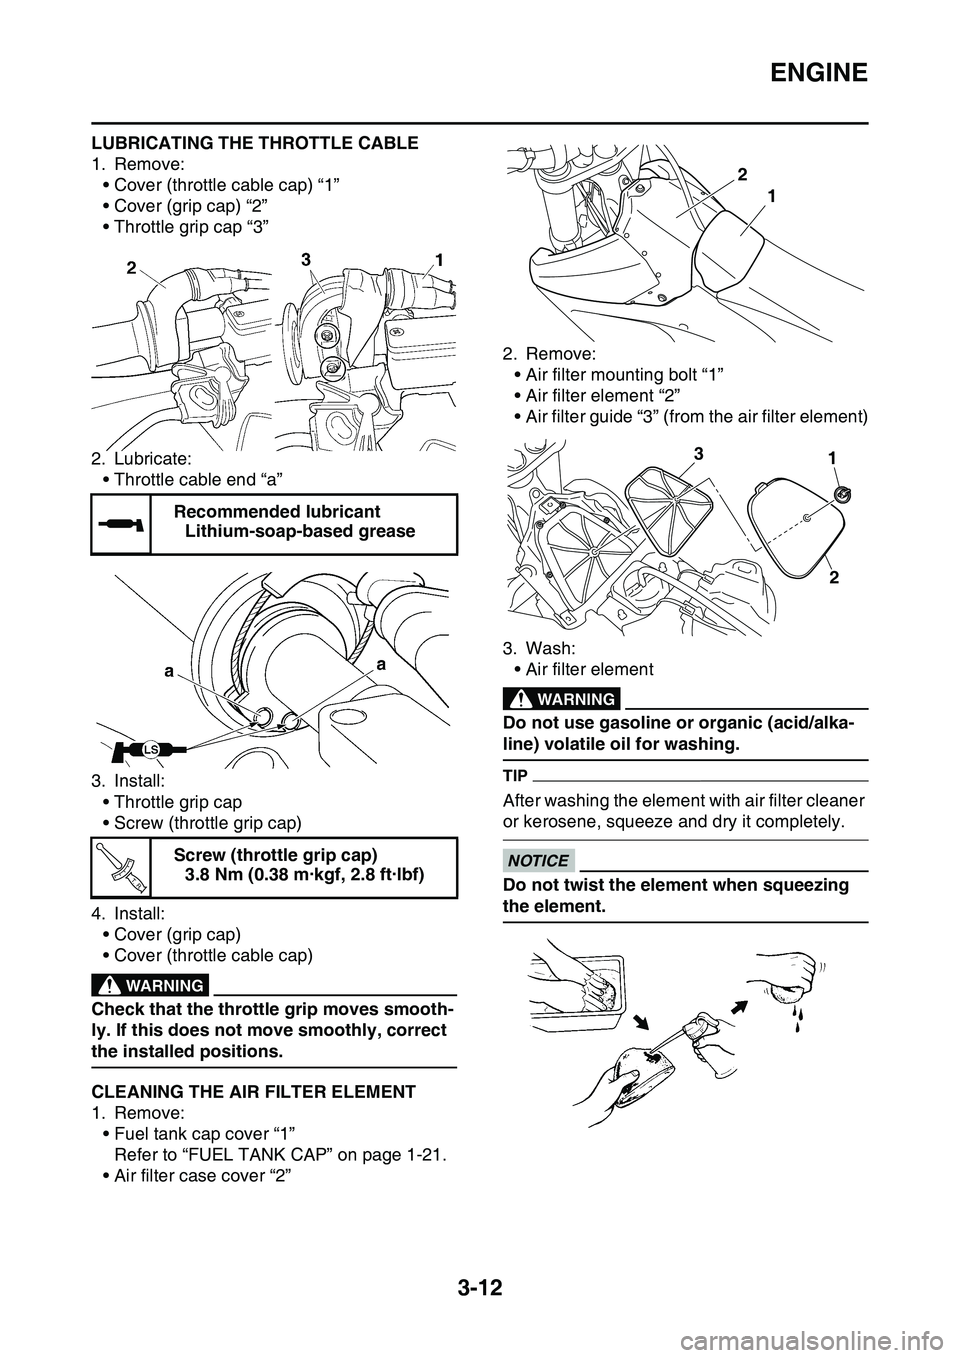 YAMAHA YZ450F 2014  Owners Manual ENGINE
3-12
LUBRICATING THE THROTTLE CABLE
1. Remove:• Cover (throttle cable cap) “1”
• Cover (grip cap) “2”
• Throttle grip cap “3”
2. Lubricate: • Throttle cable end “a” 
3. 